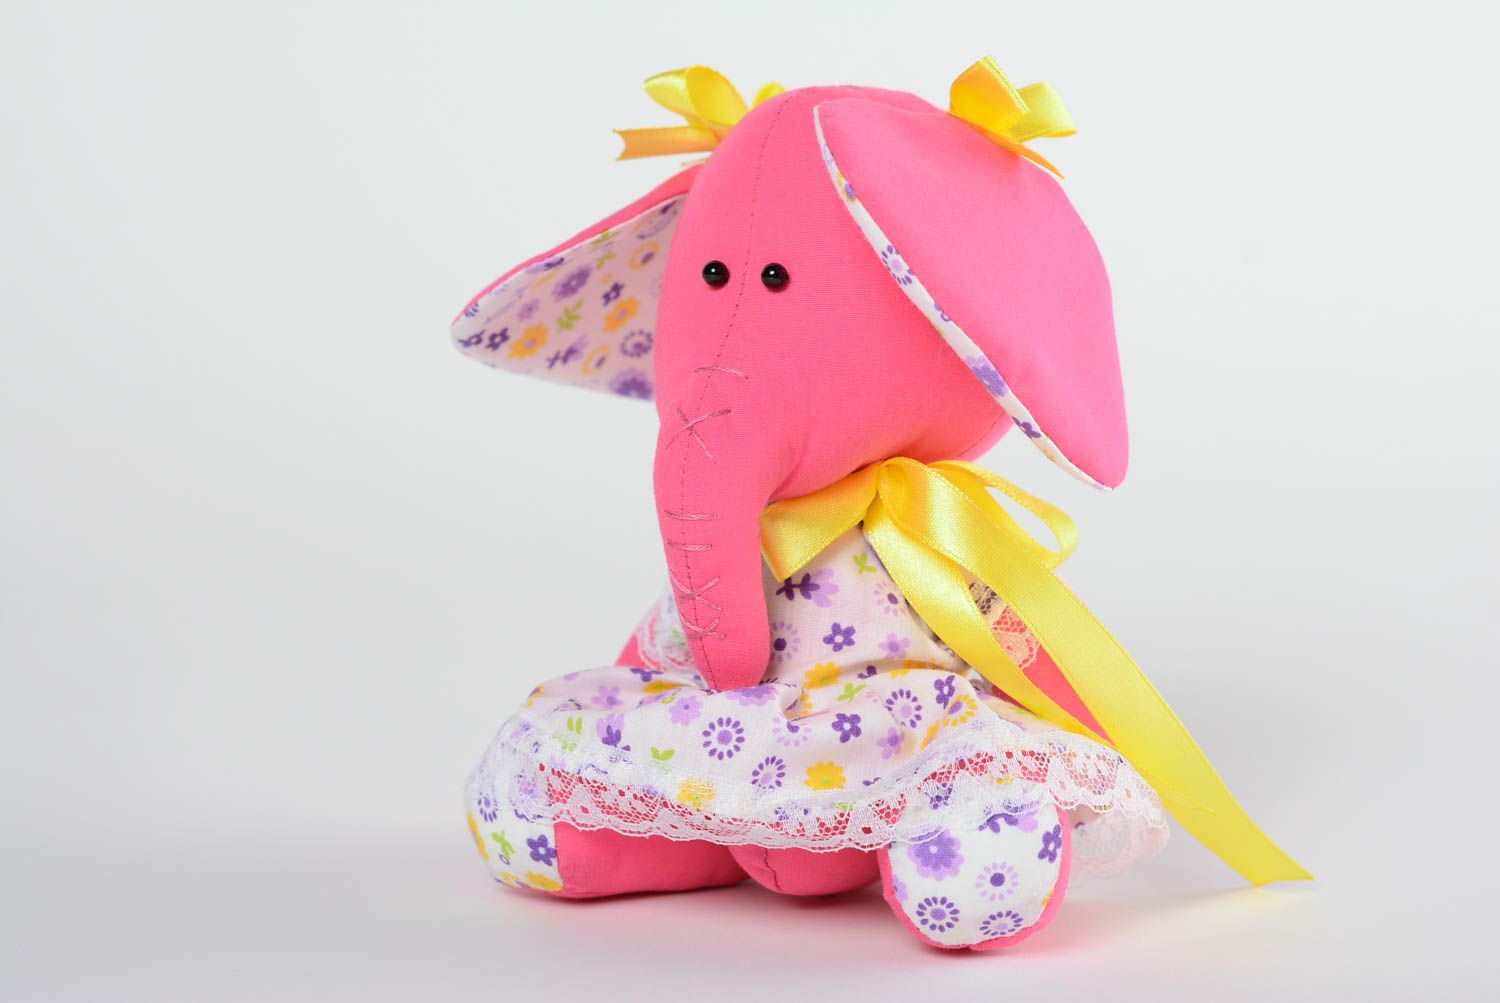 Handmade cotton soft toy pink elephant in floral dress with yellow ribbons photo 1